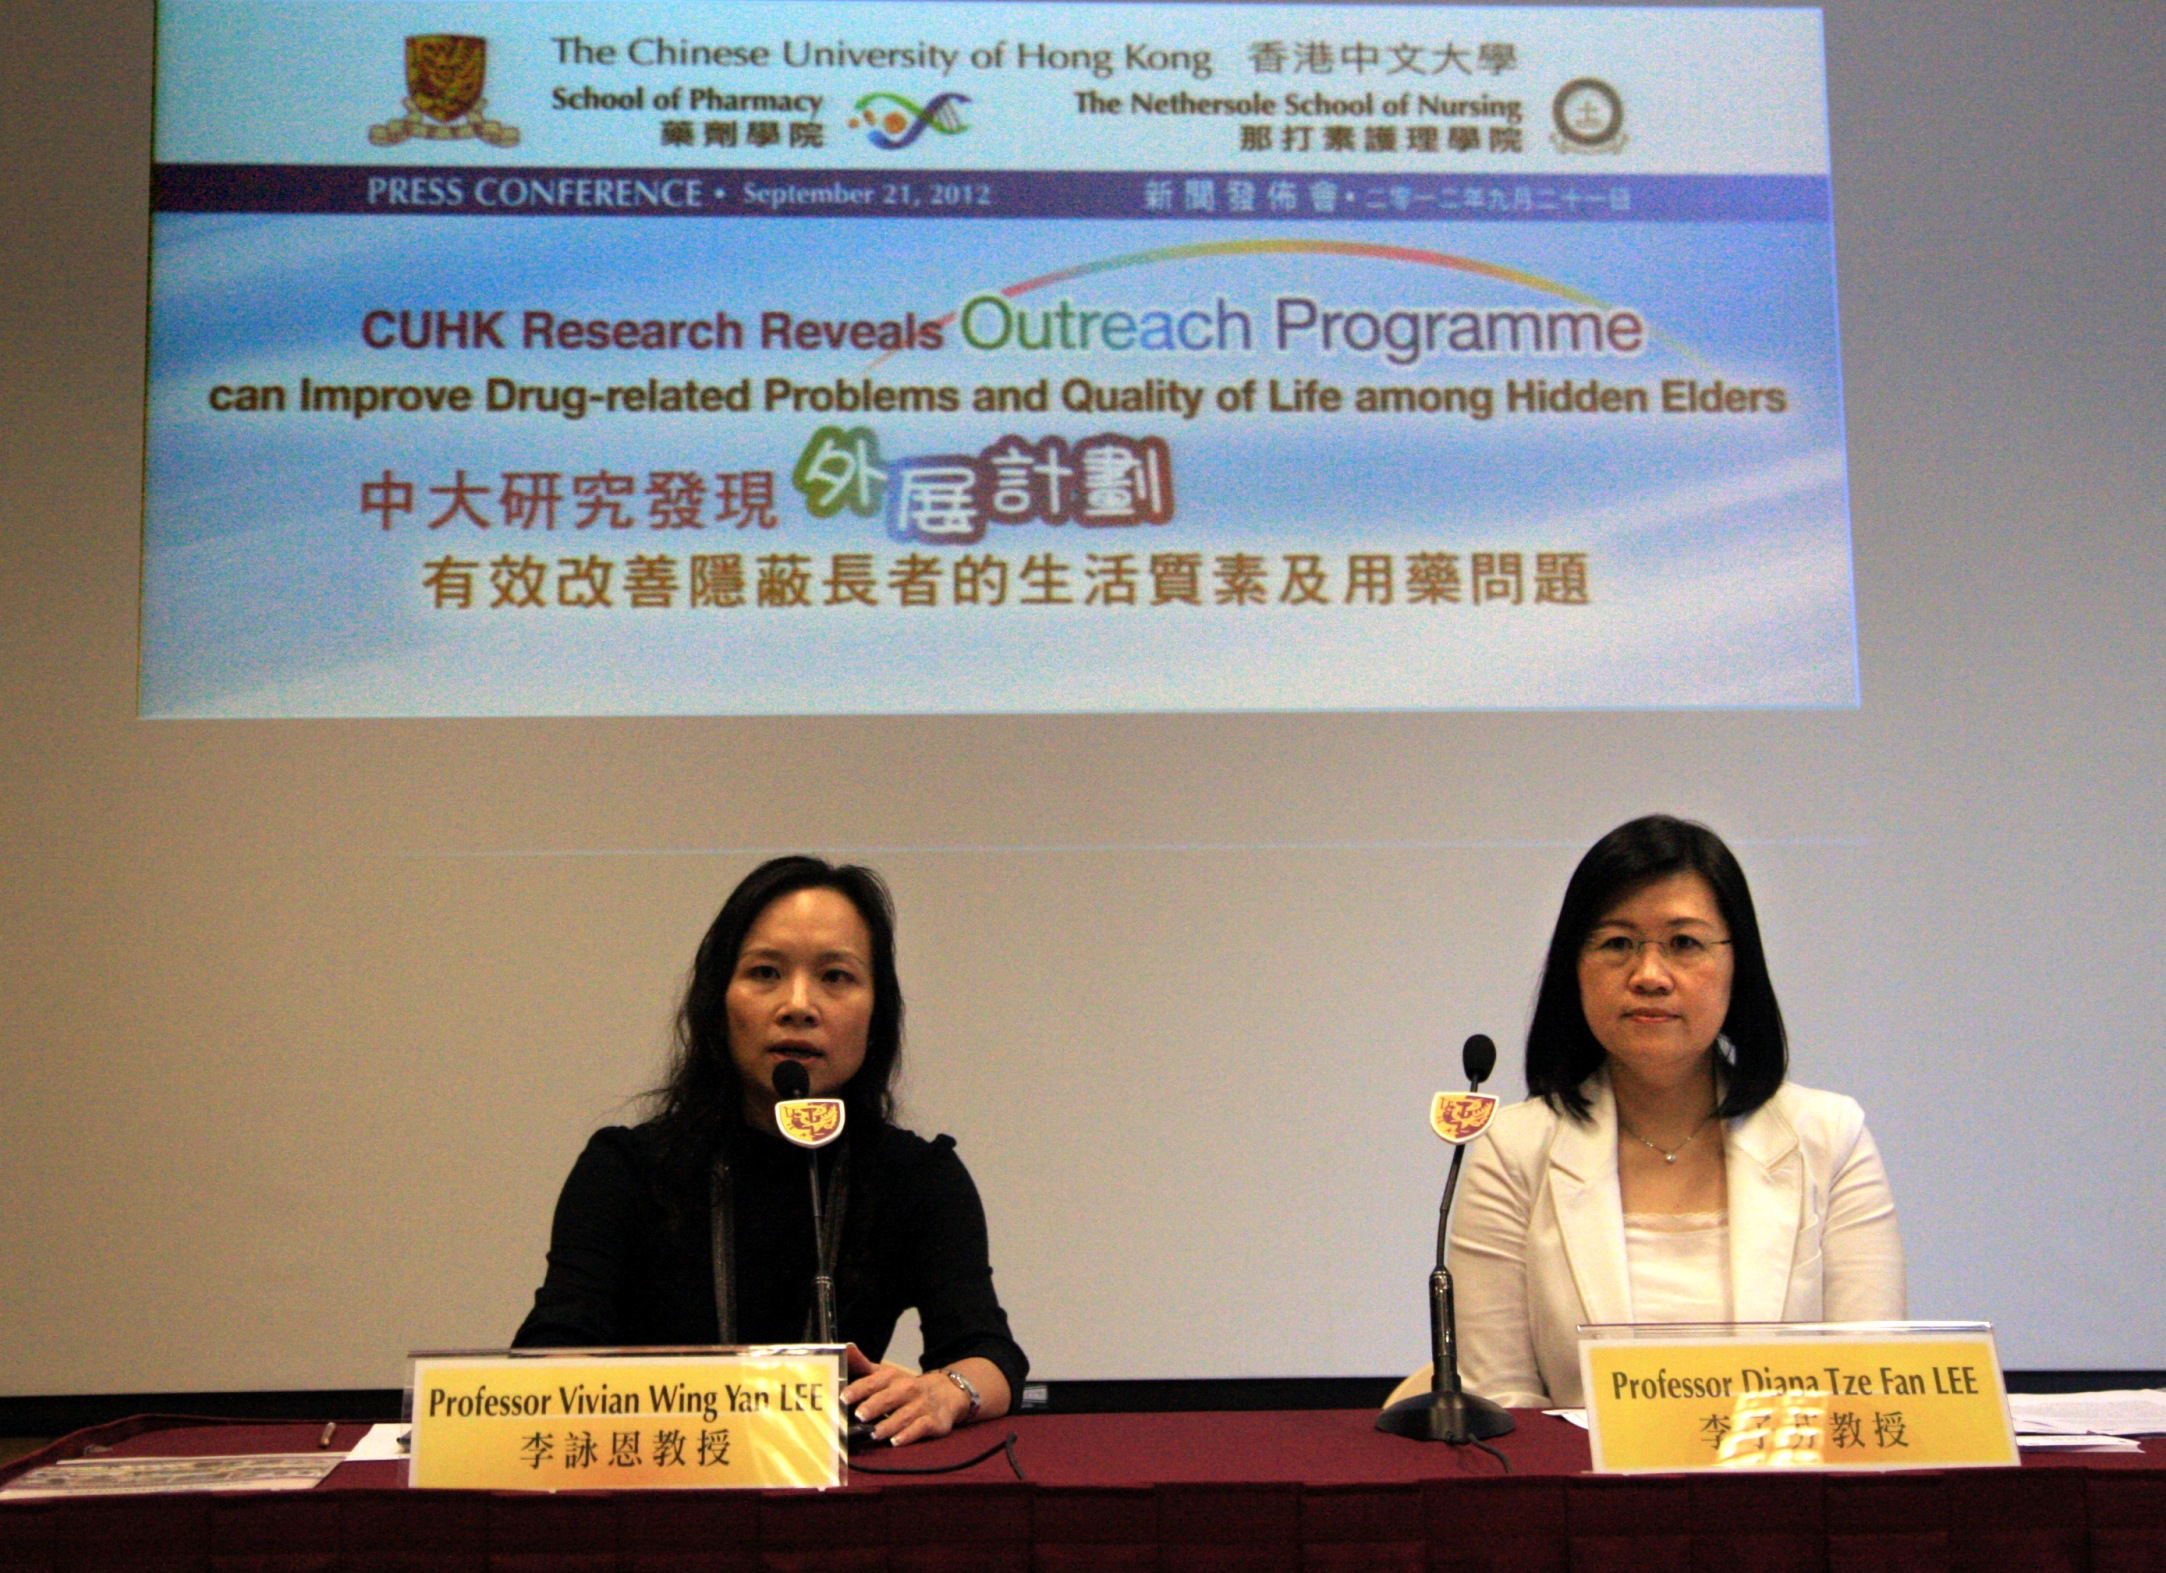 Professor Vivian Wing Yan Lee, Associate Professor, School of Pharmacy; and Professor Diana Tze Fan Lee, Professor of Nursing and Director of the Nethersole School of Nursing at CUHK jointly present their research findings on the effectiveness of the outreach programme for hidden elders.